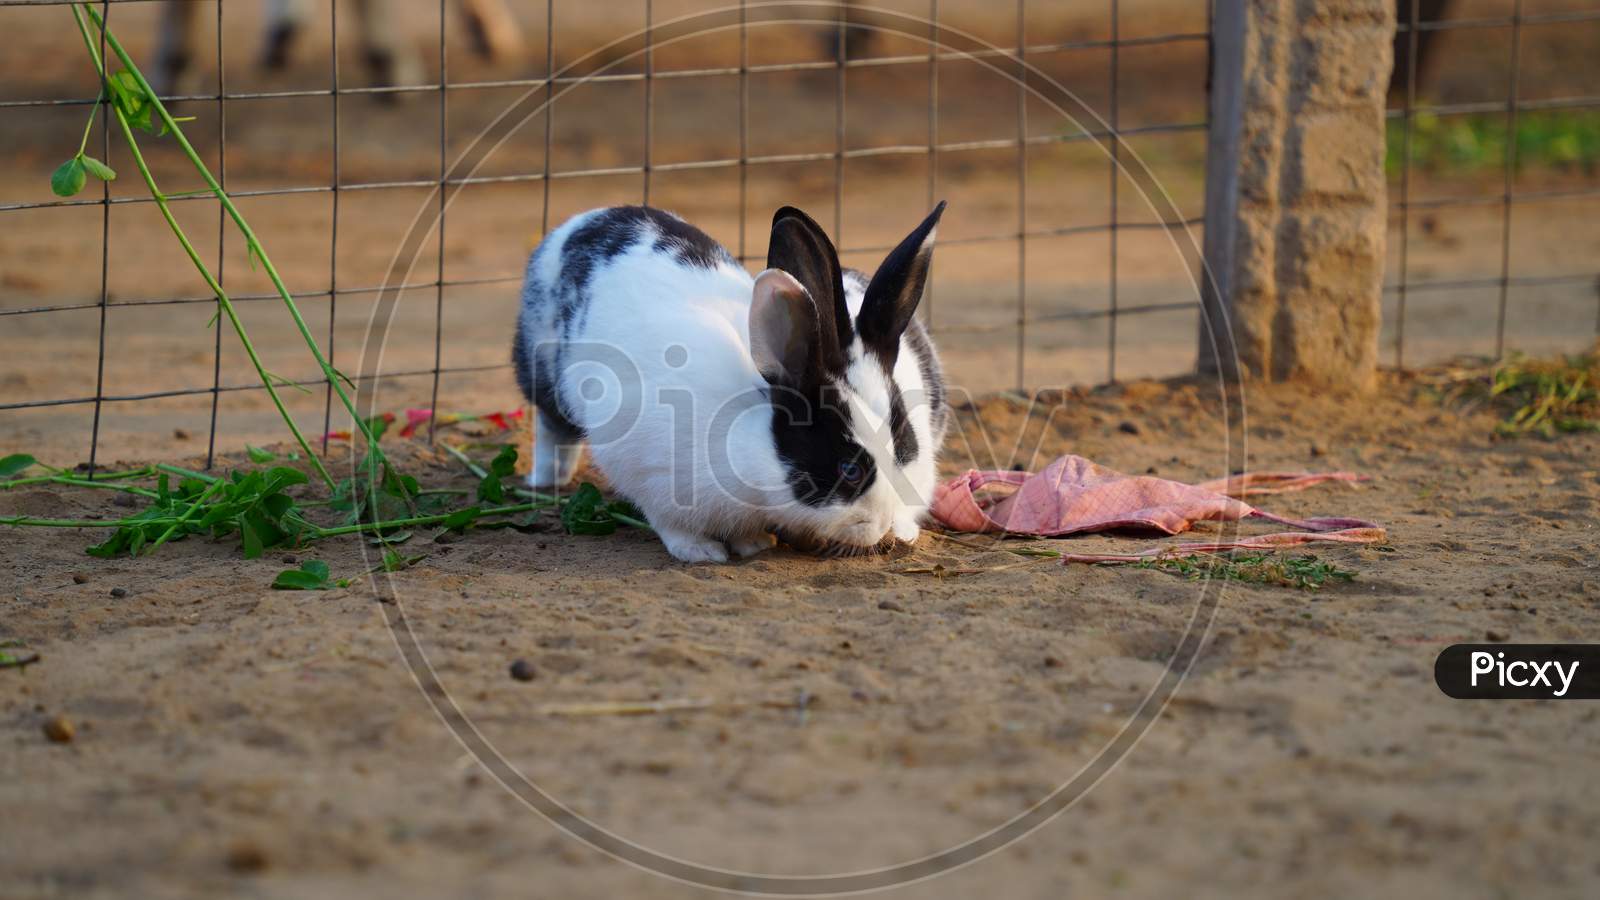 Adorable Closeup Of Two Black And White Color Rabbit Walking In Fence Or Iron Net.